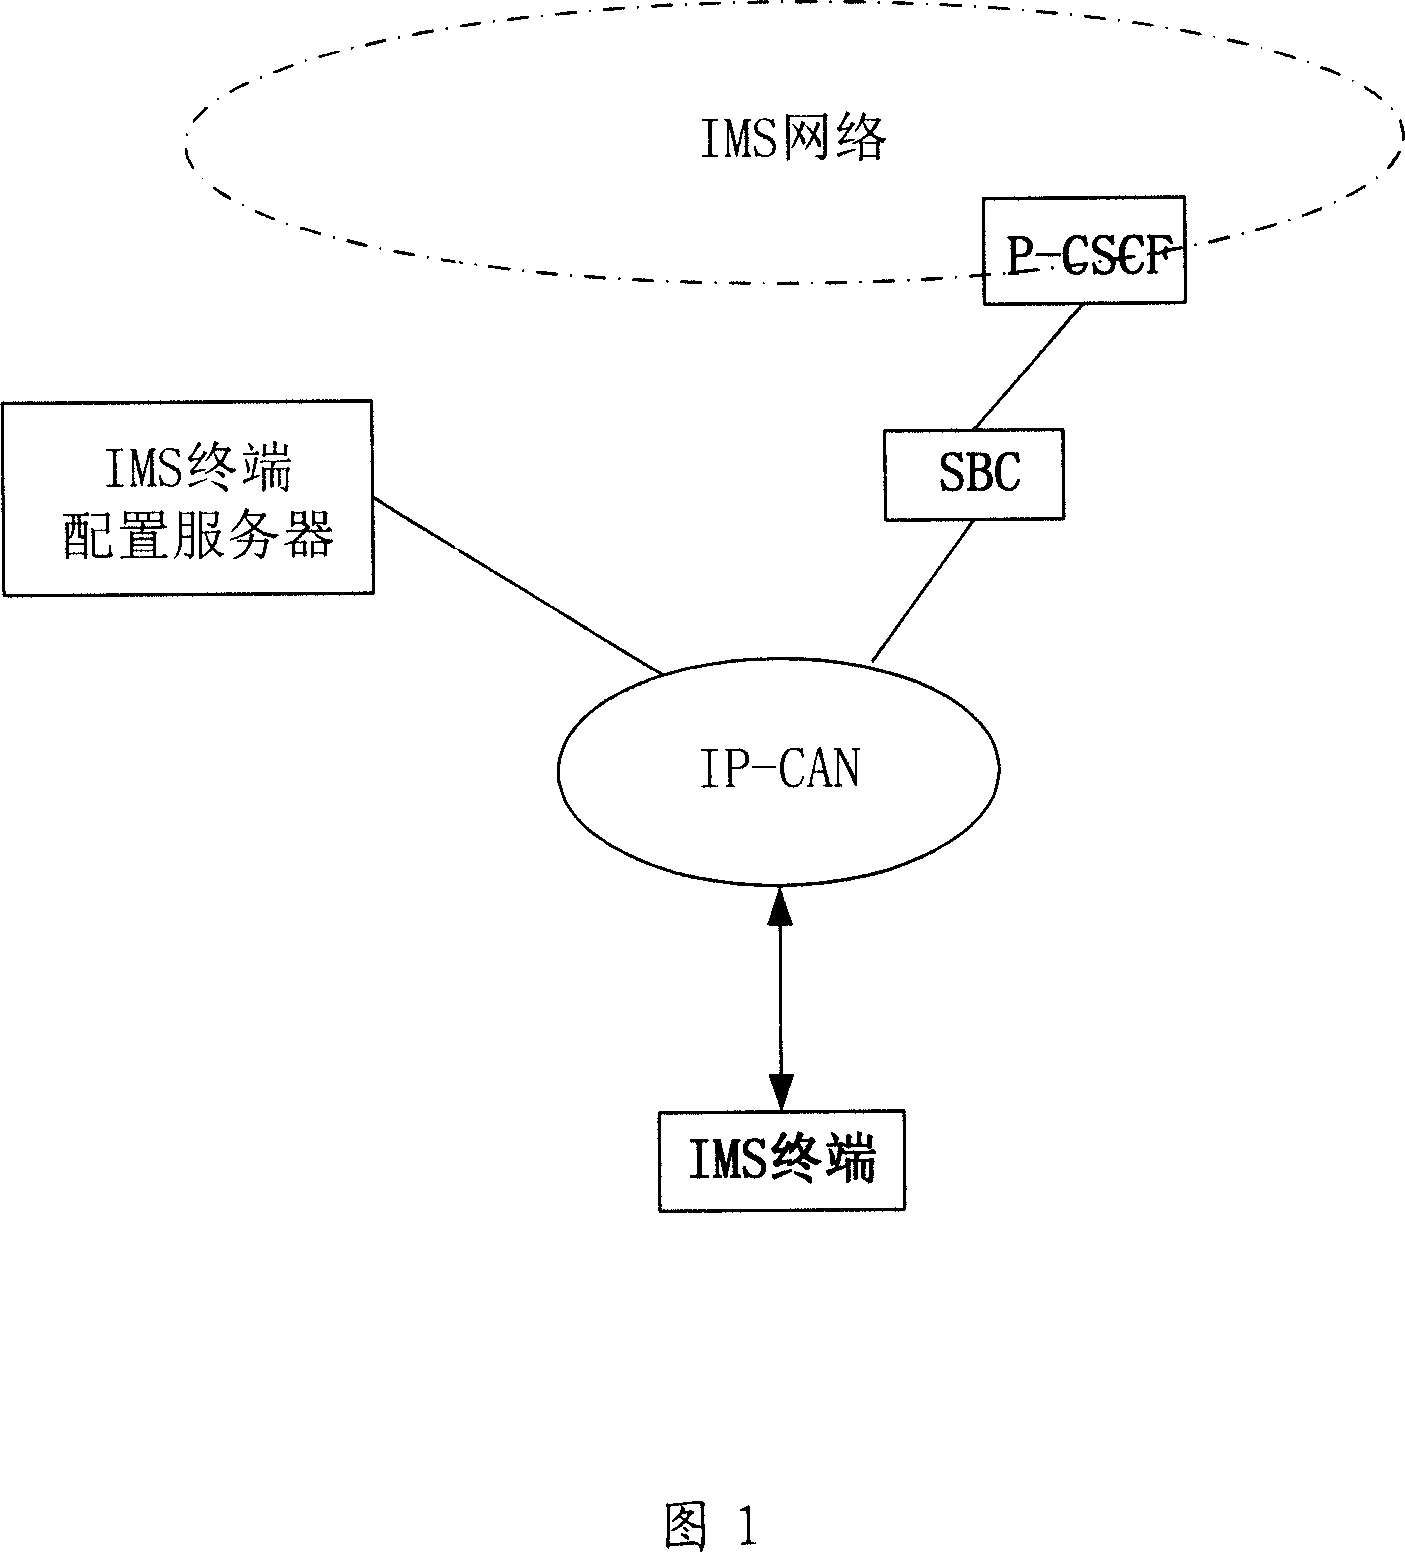 IMS terminal configuration server and IMS localization entry point detecting method